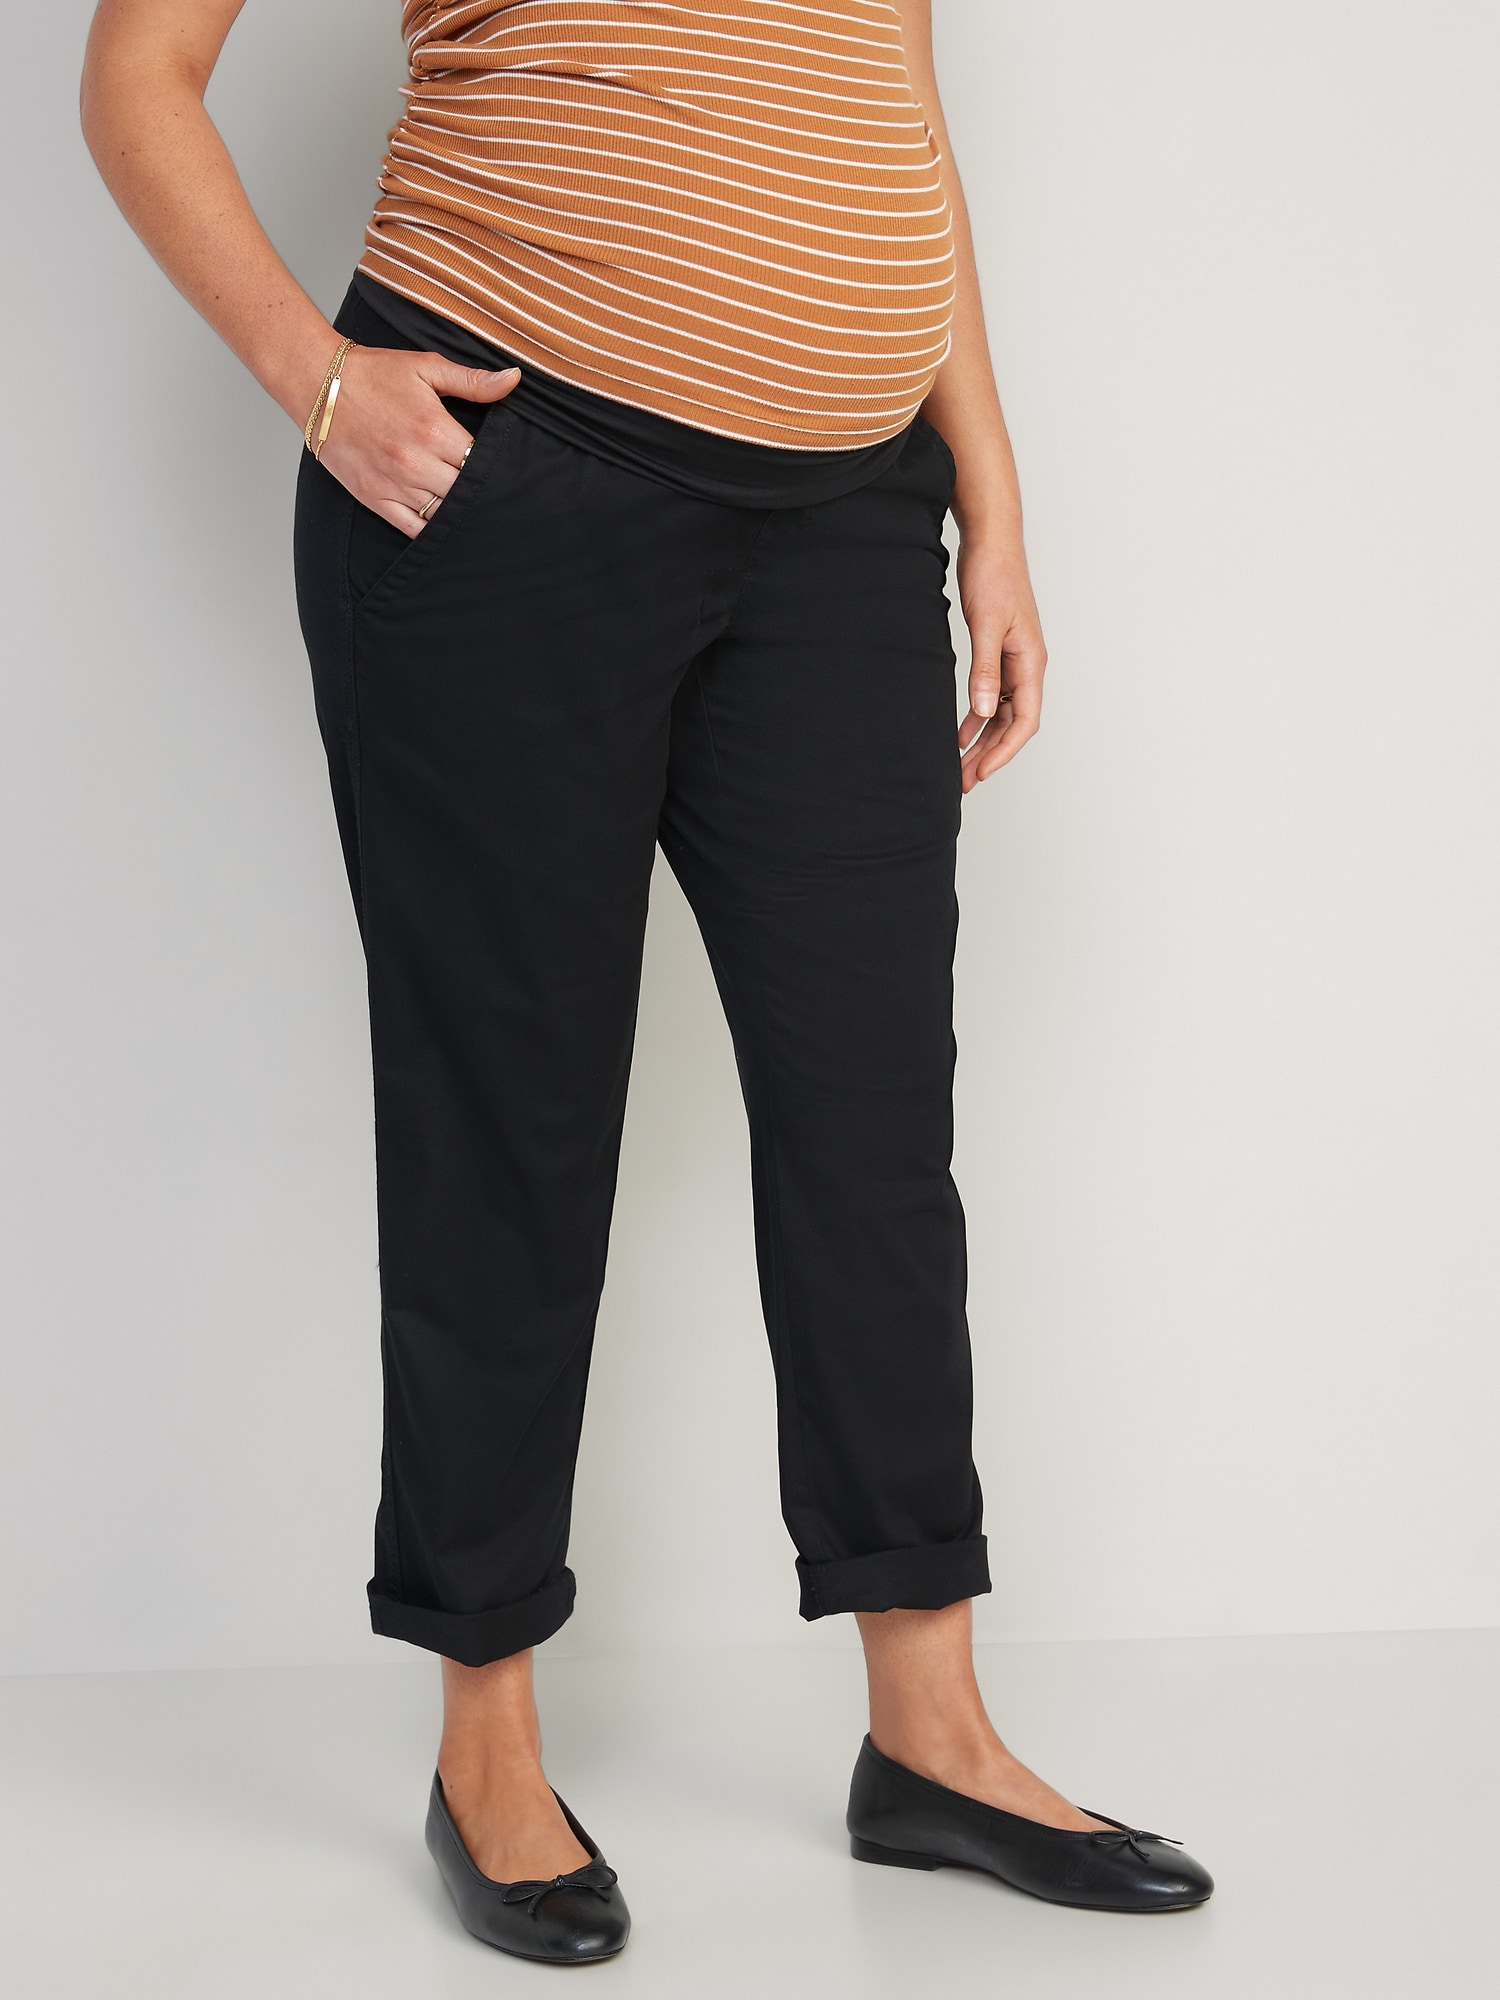 Wide Leg Maternity Pants for Work or Lounge Through Pregnancy & Beyond